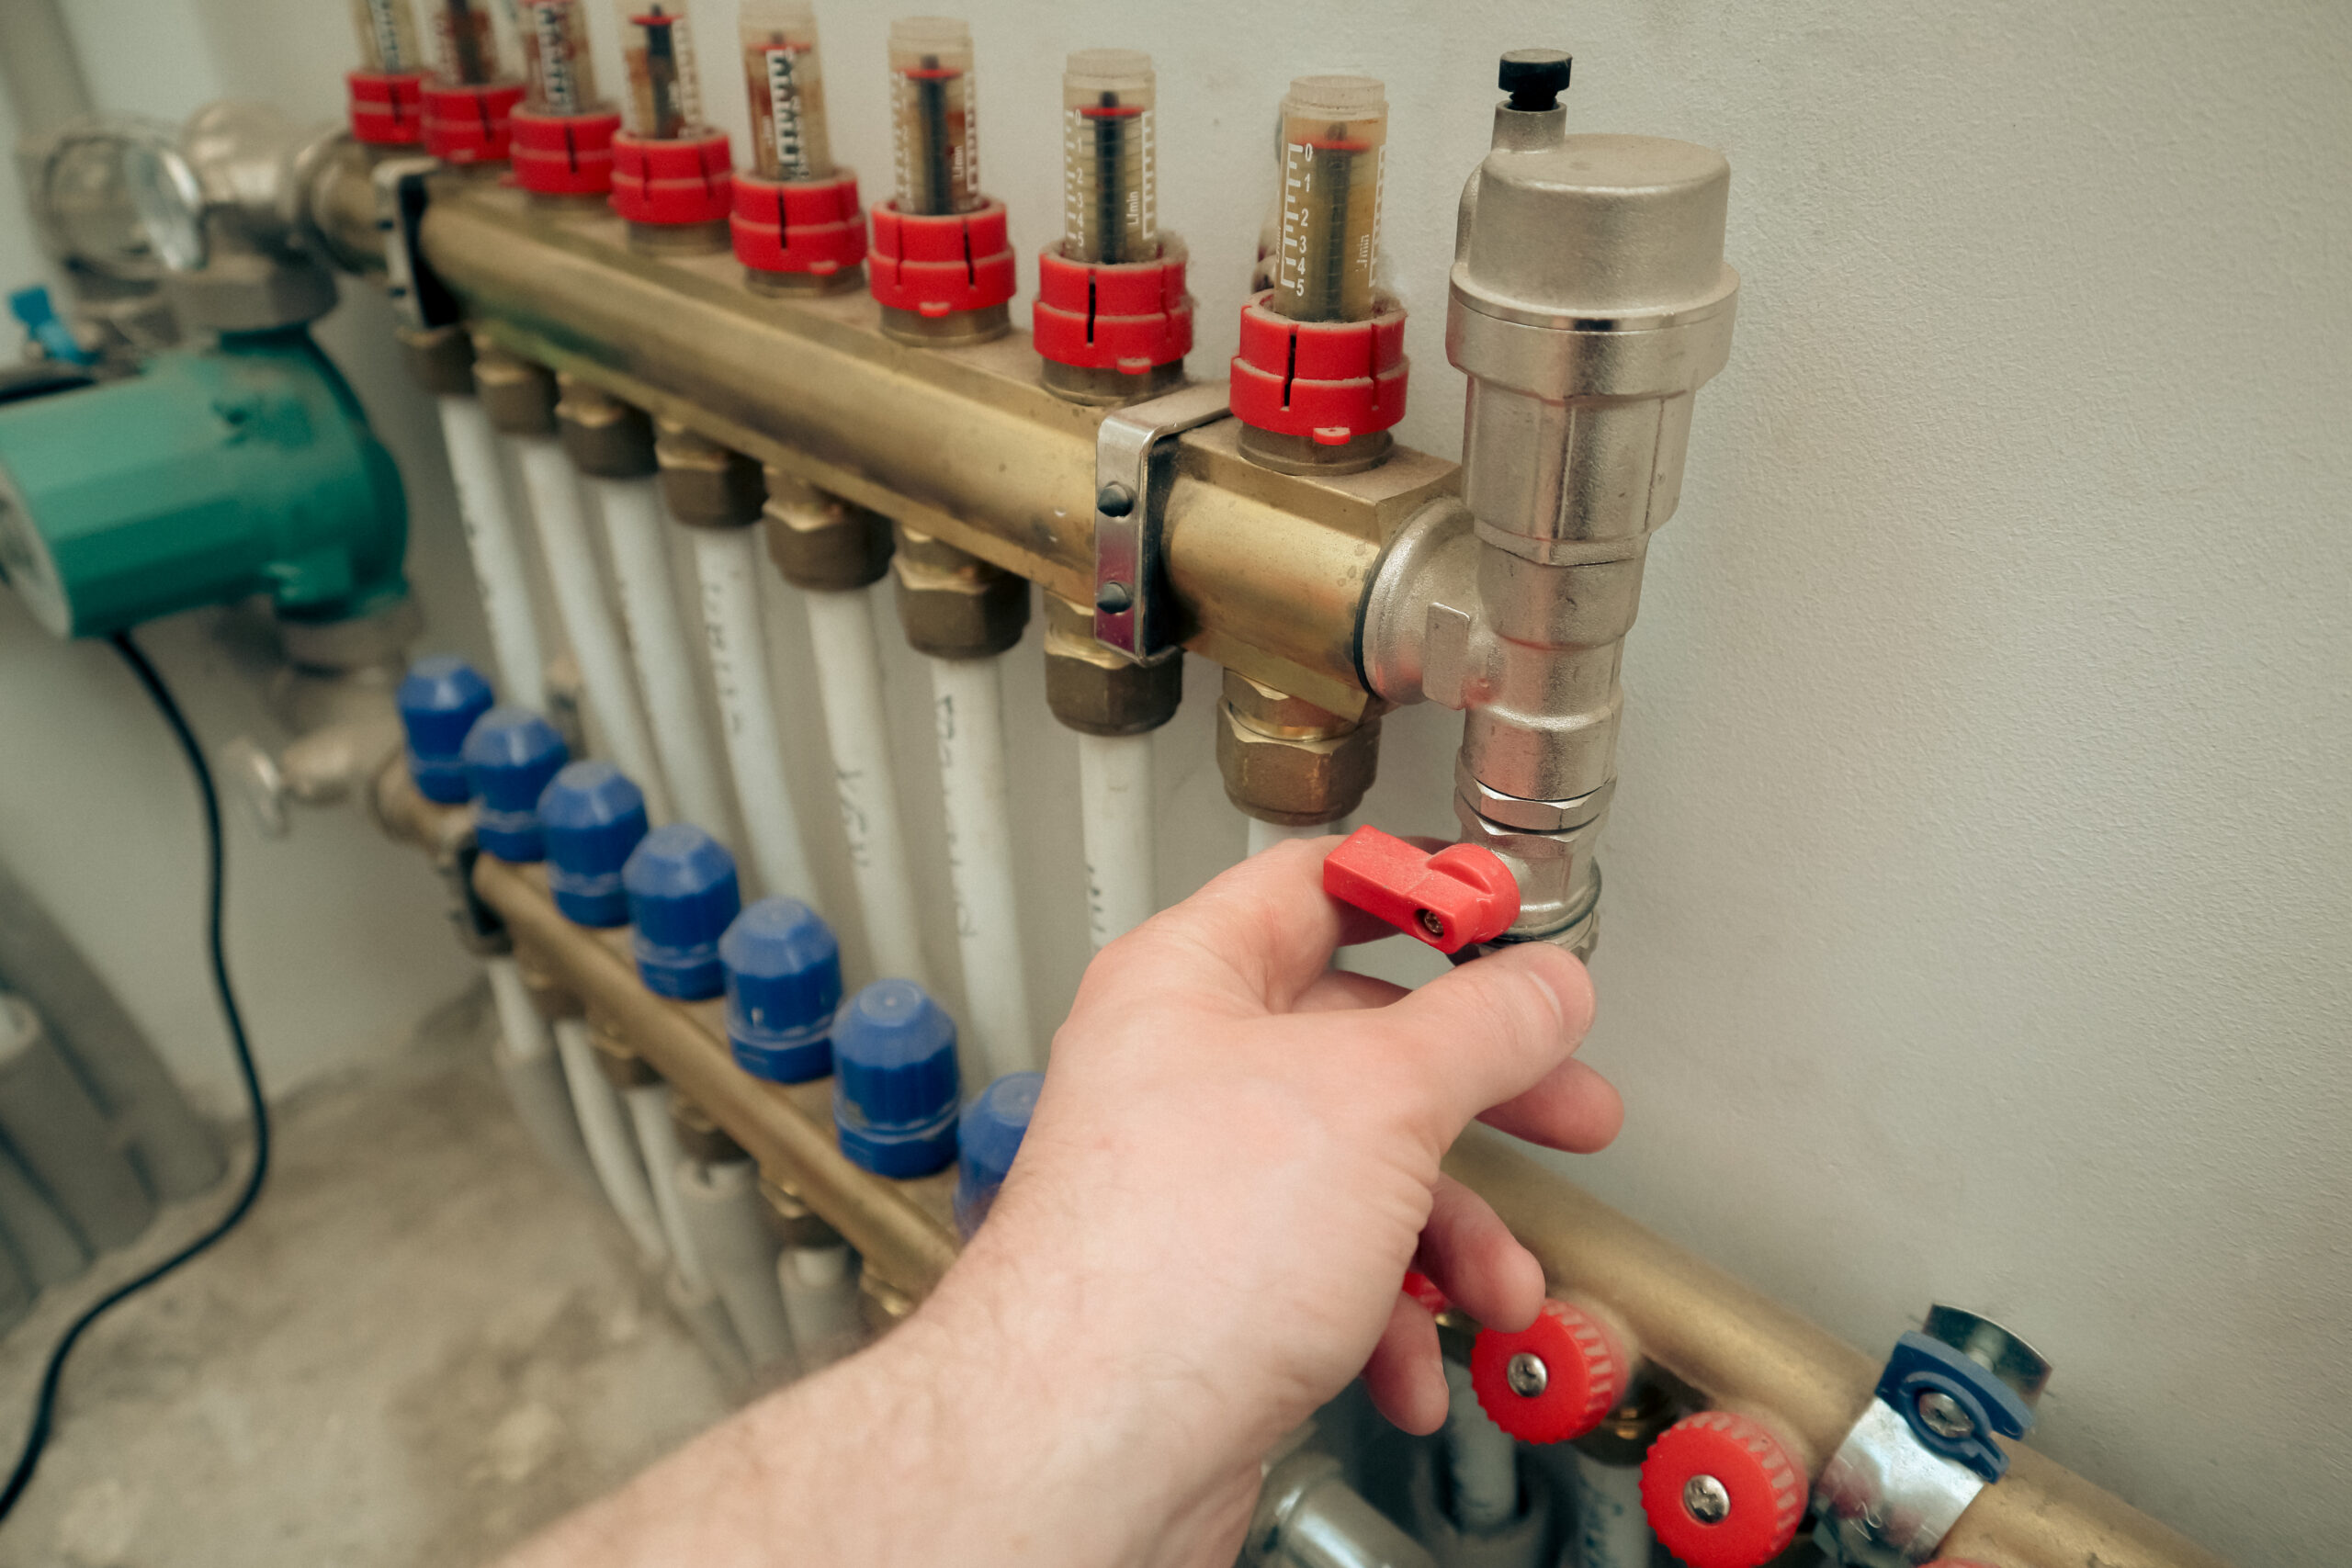 Plumber at work, plumbing repair service, assemble and install concept. Plumber fixing central heating system